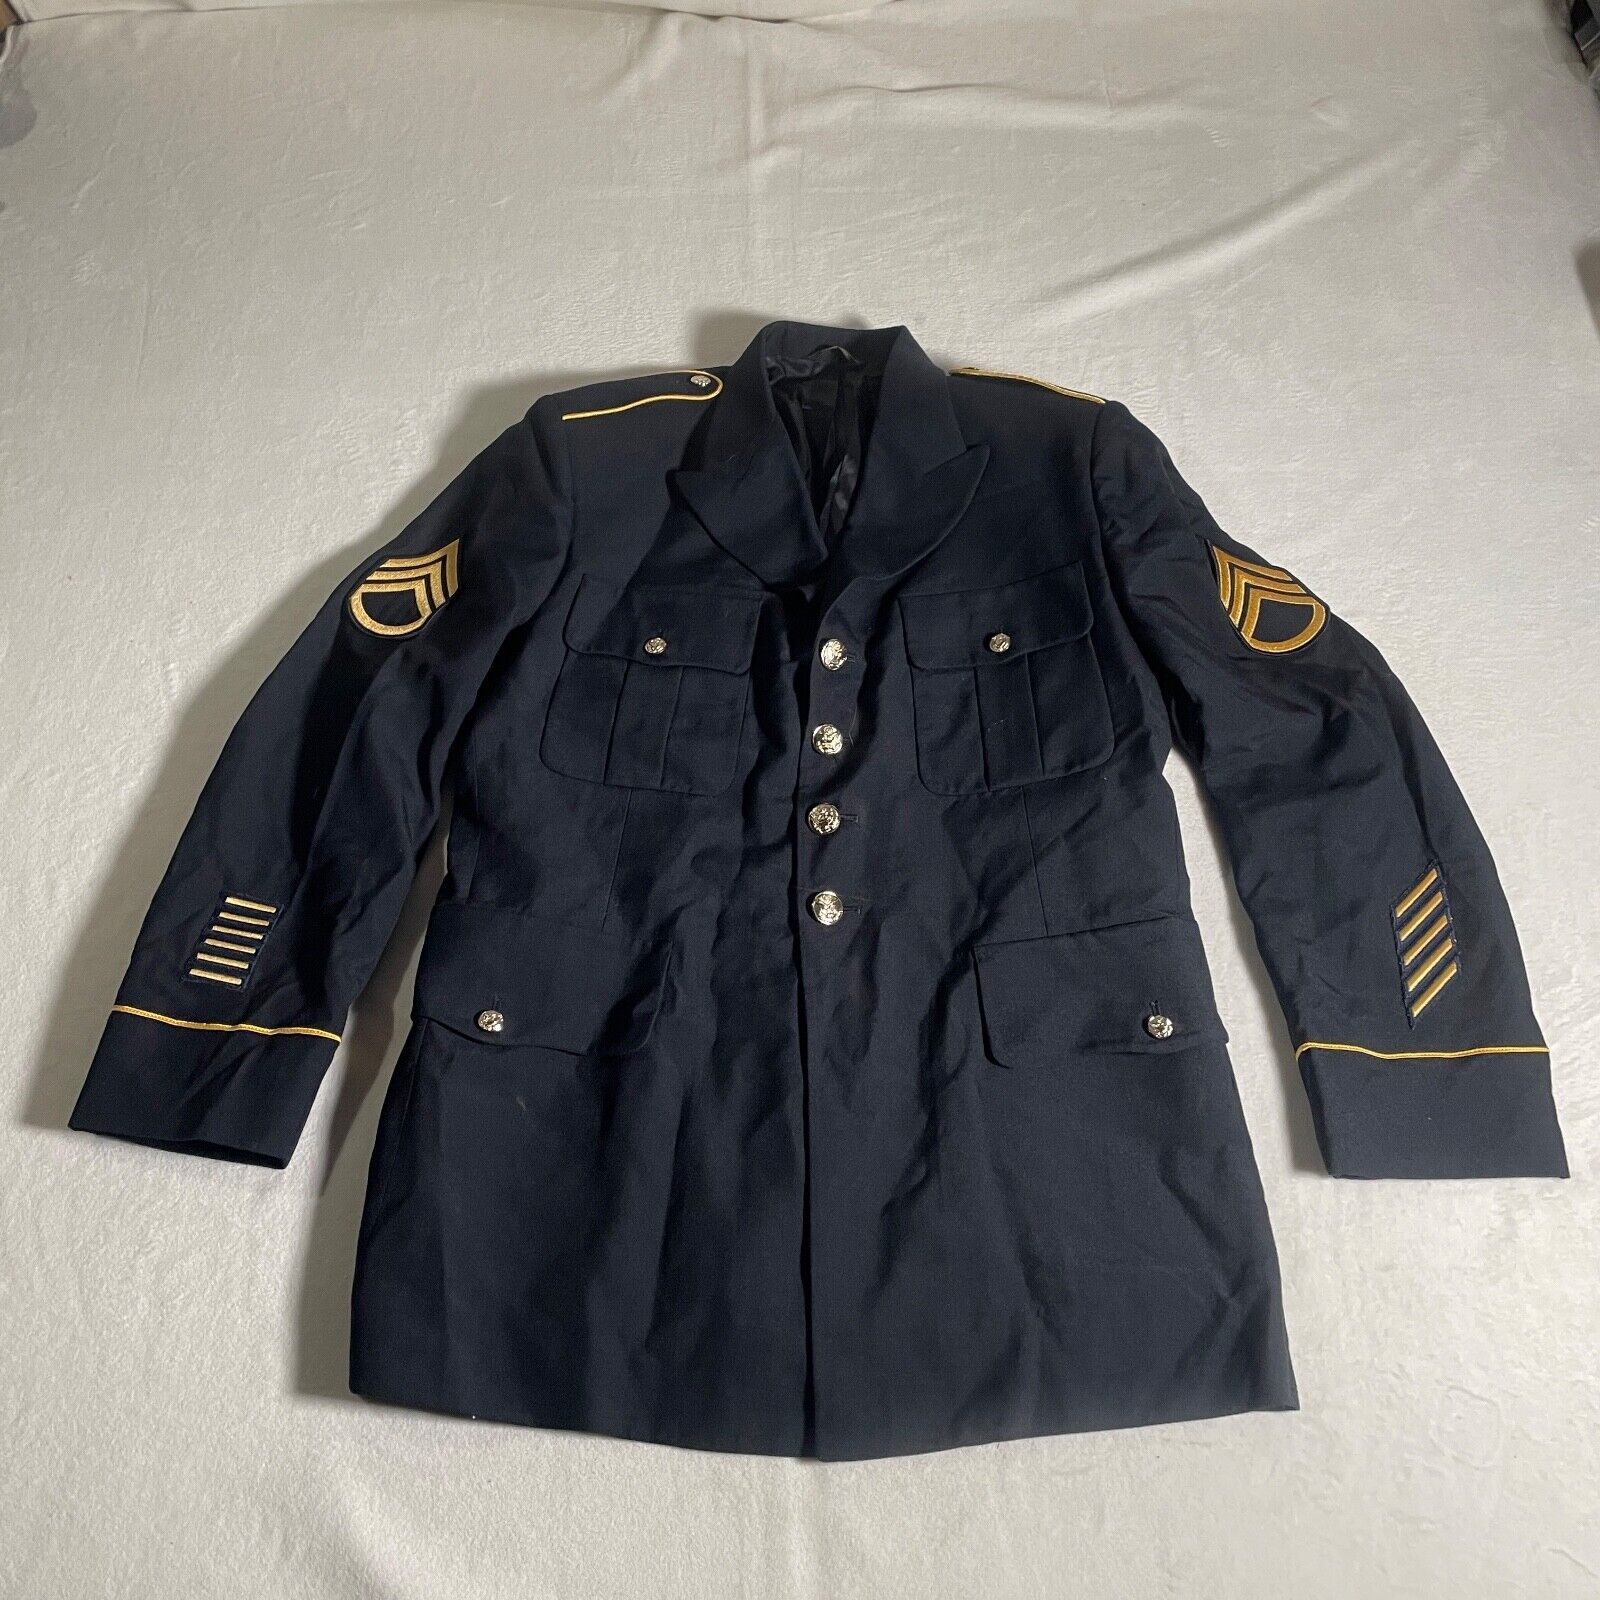 Bremen Bowdon Military Jacket 43 R Blue Patches Pins Defense Logistic Agency